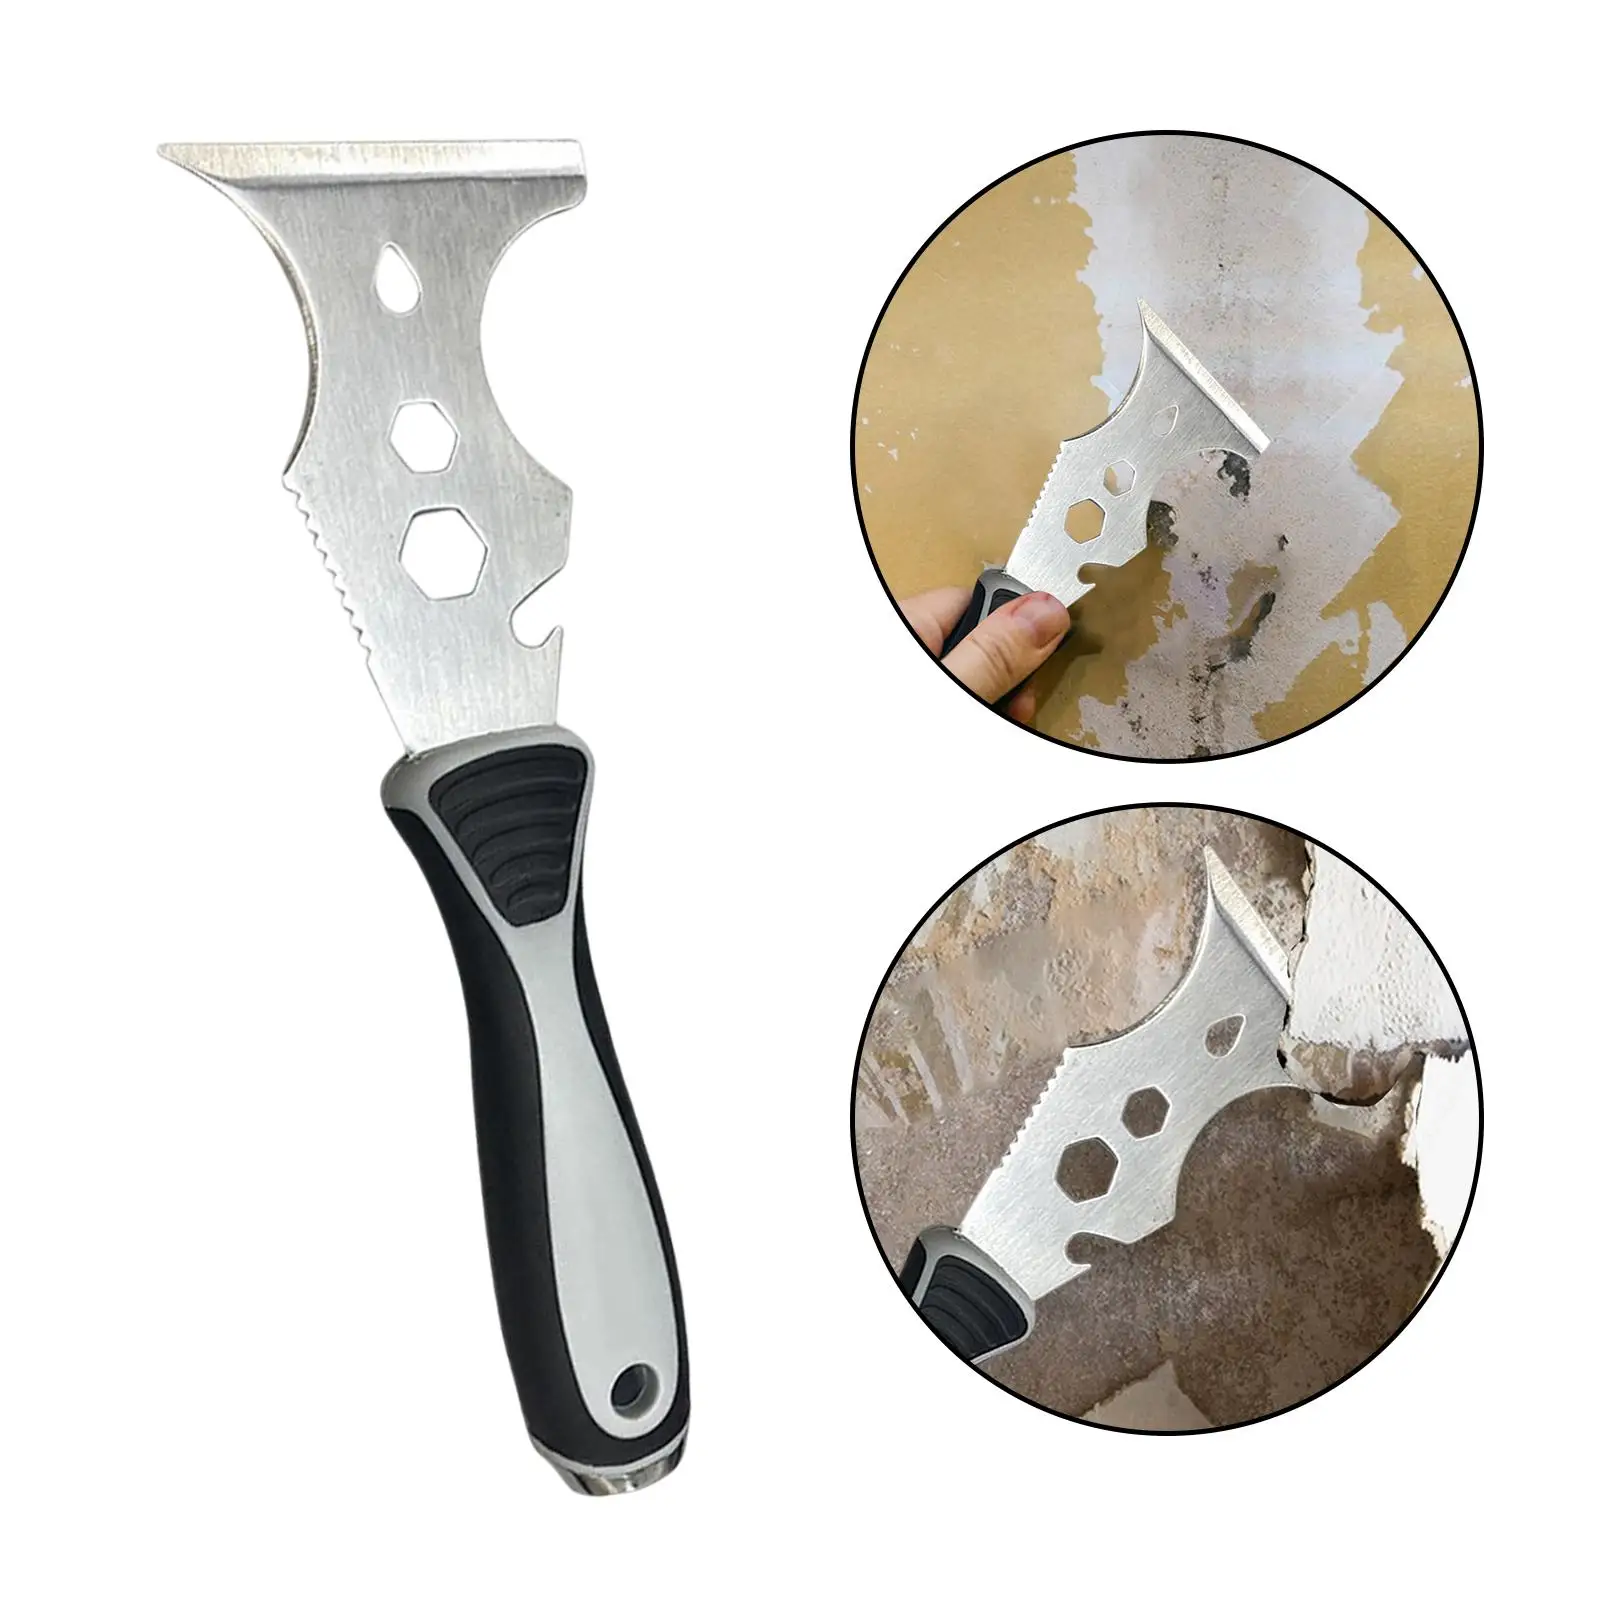 Multifunctional Scraper Tool Wallpaper Scraper Paint Remover Stainless Steel Putty Knife for Home Decoration Repair